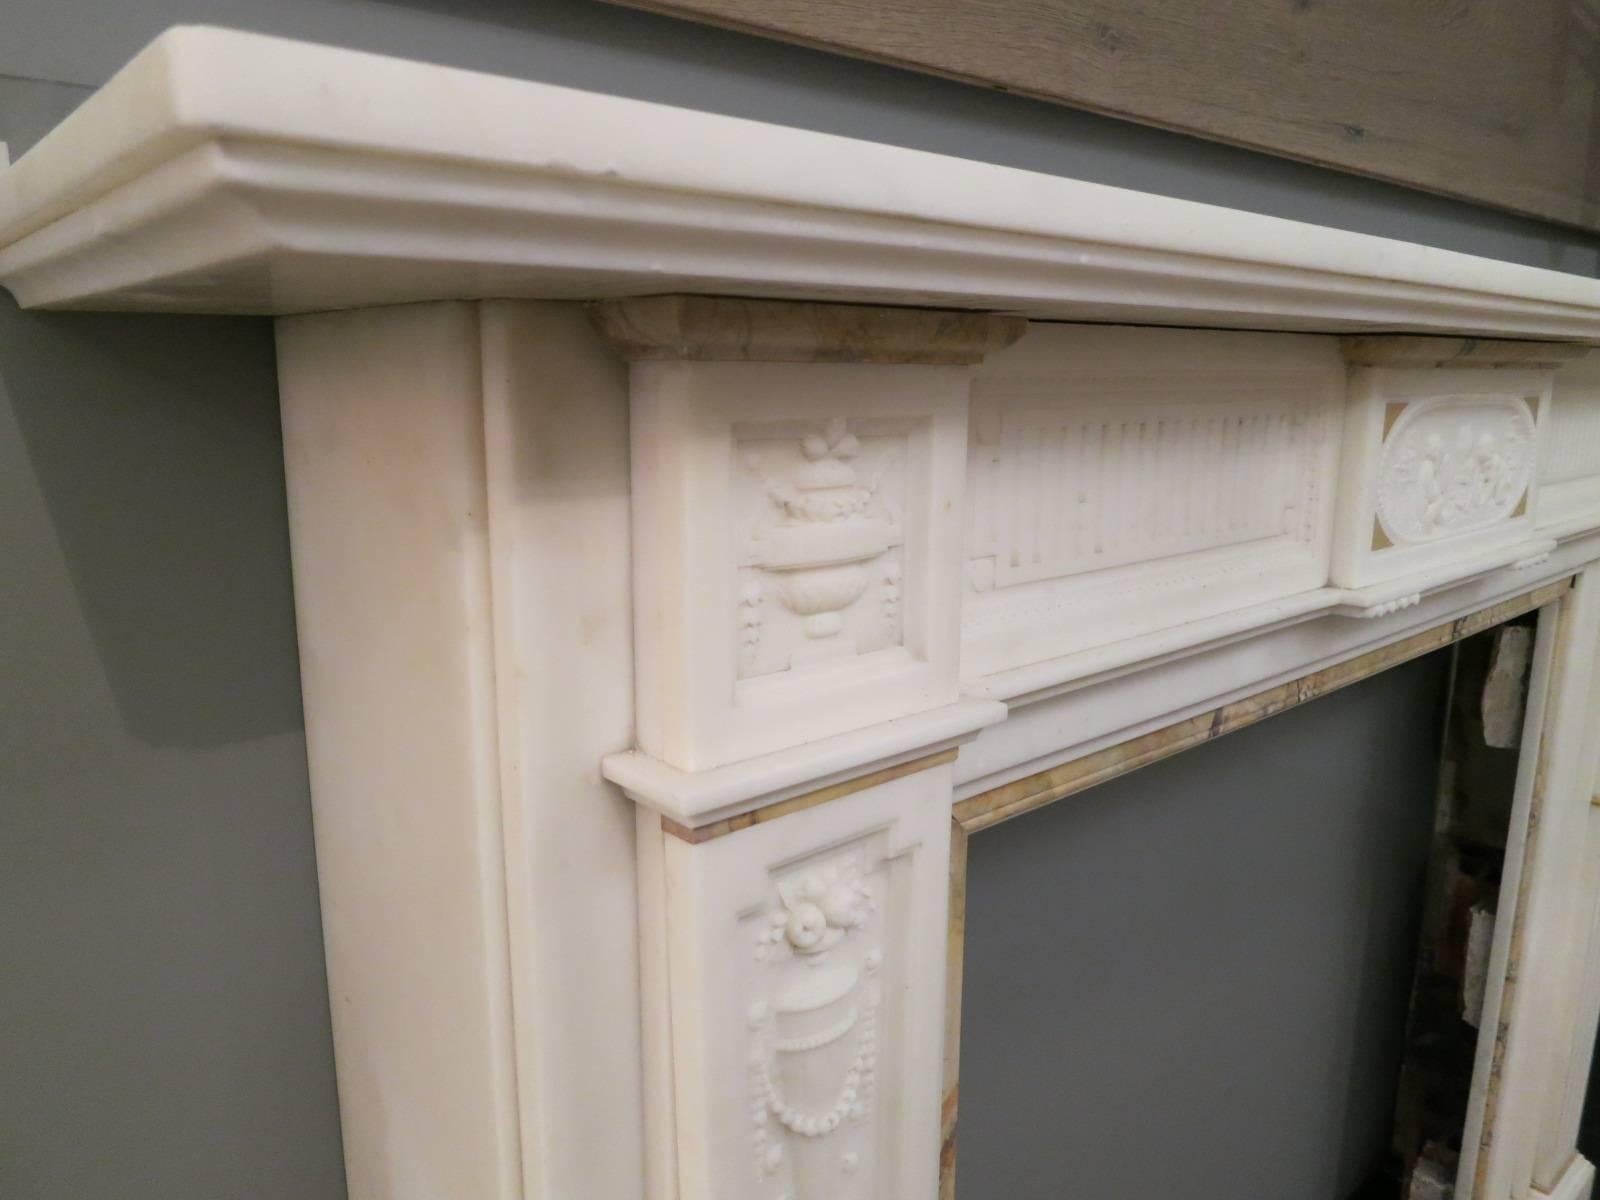 A quality late 19th century Regency style fireplace, executed in Italian statuary white marble, with Sienna marble inner slips, capitals and mouldings. The jambs having fluted panels with carved husks, separated by a Sienna marble moulding with